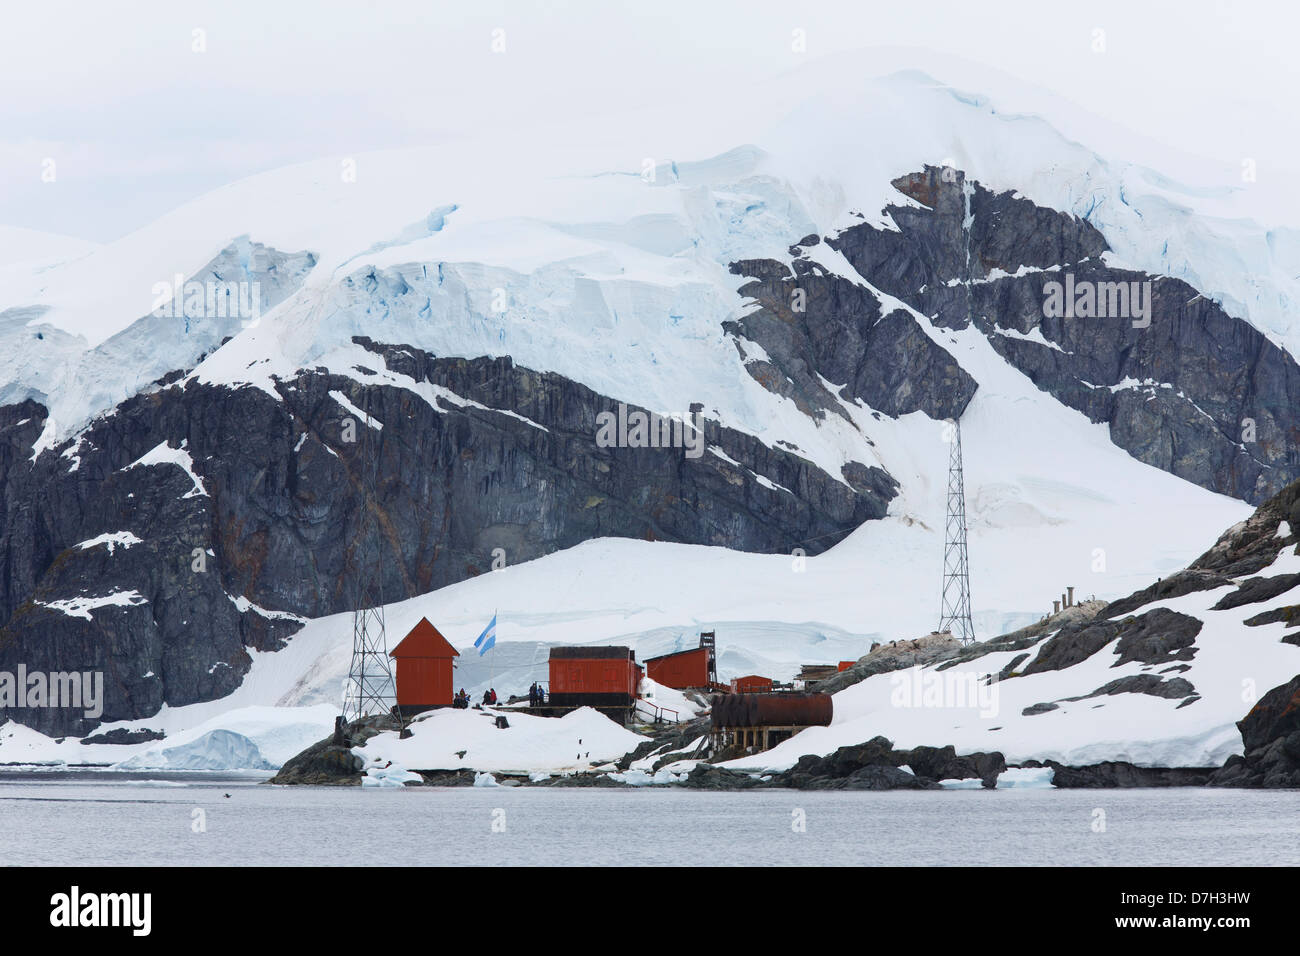 Almirante Brown Station, and Argentine station located in Paradise Bay, Antarctica. Stock Photo